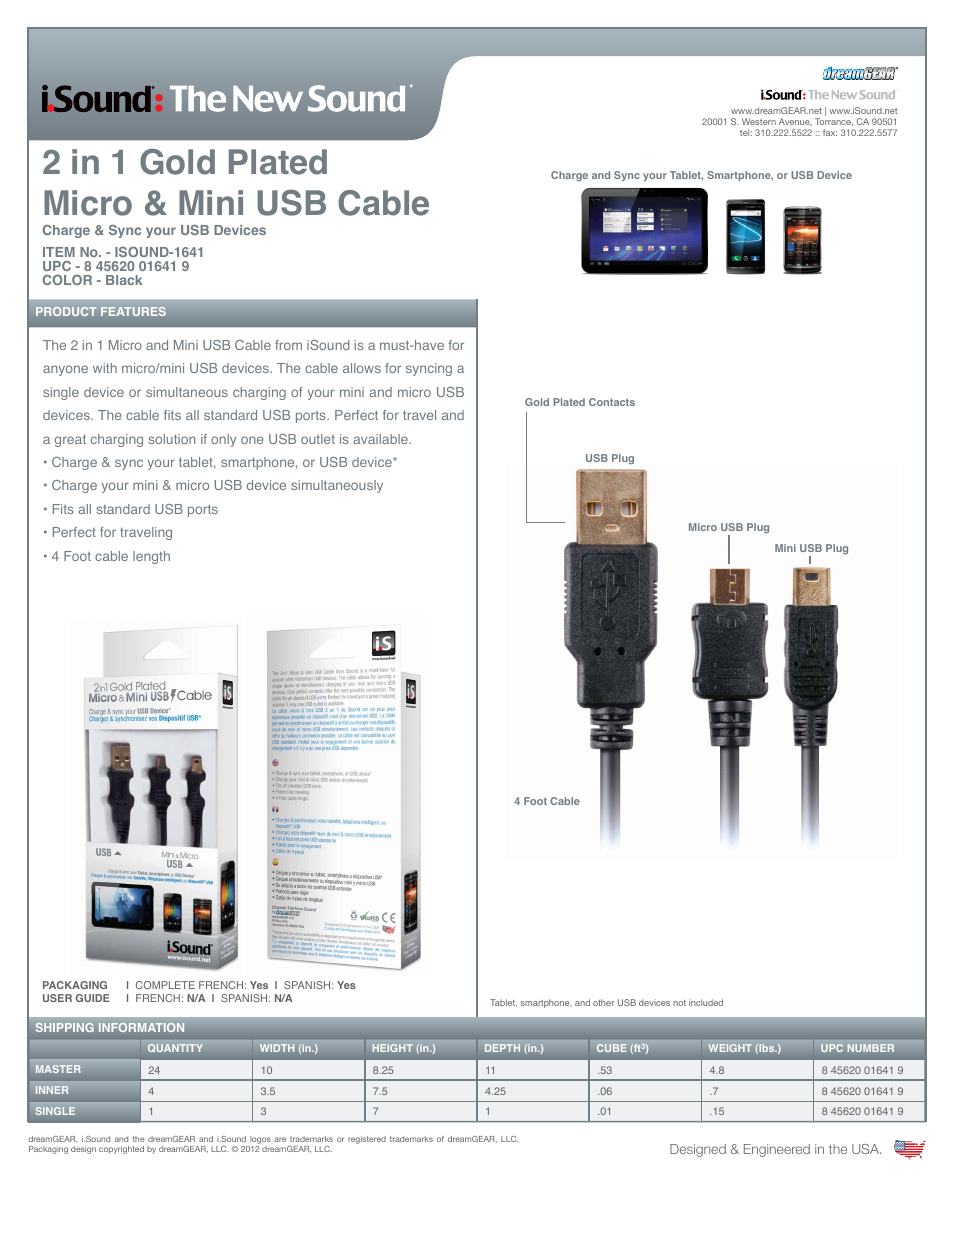 2 in 1 Gold Plated Micro & Mini USB Cable - Sell Sheet